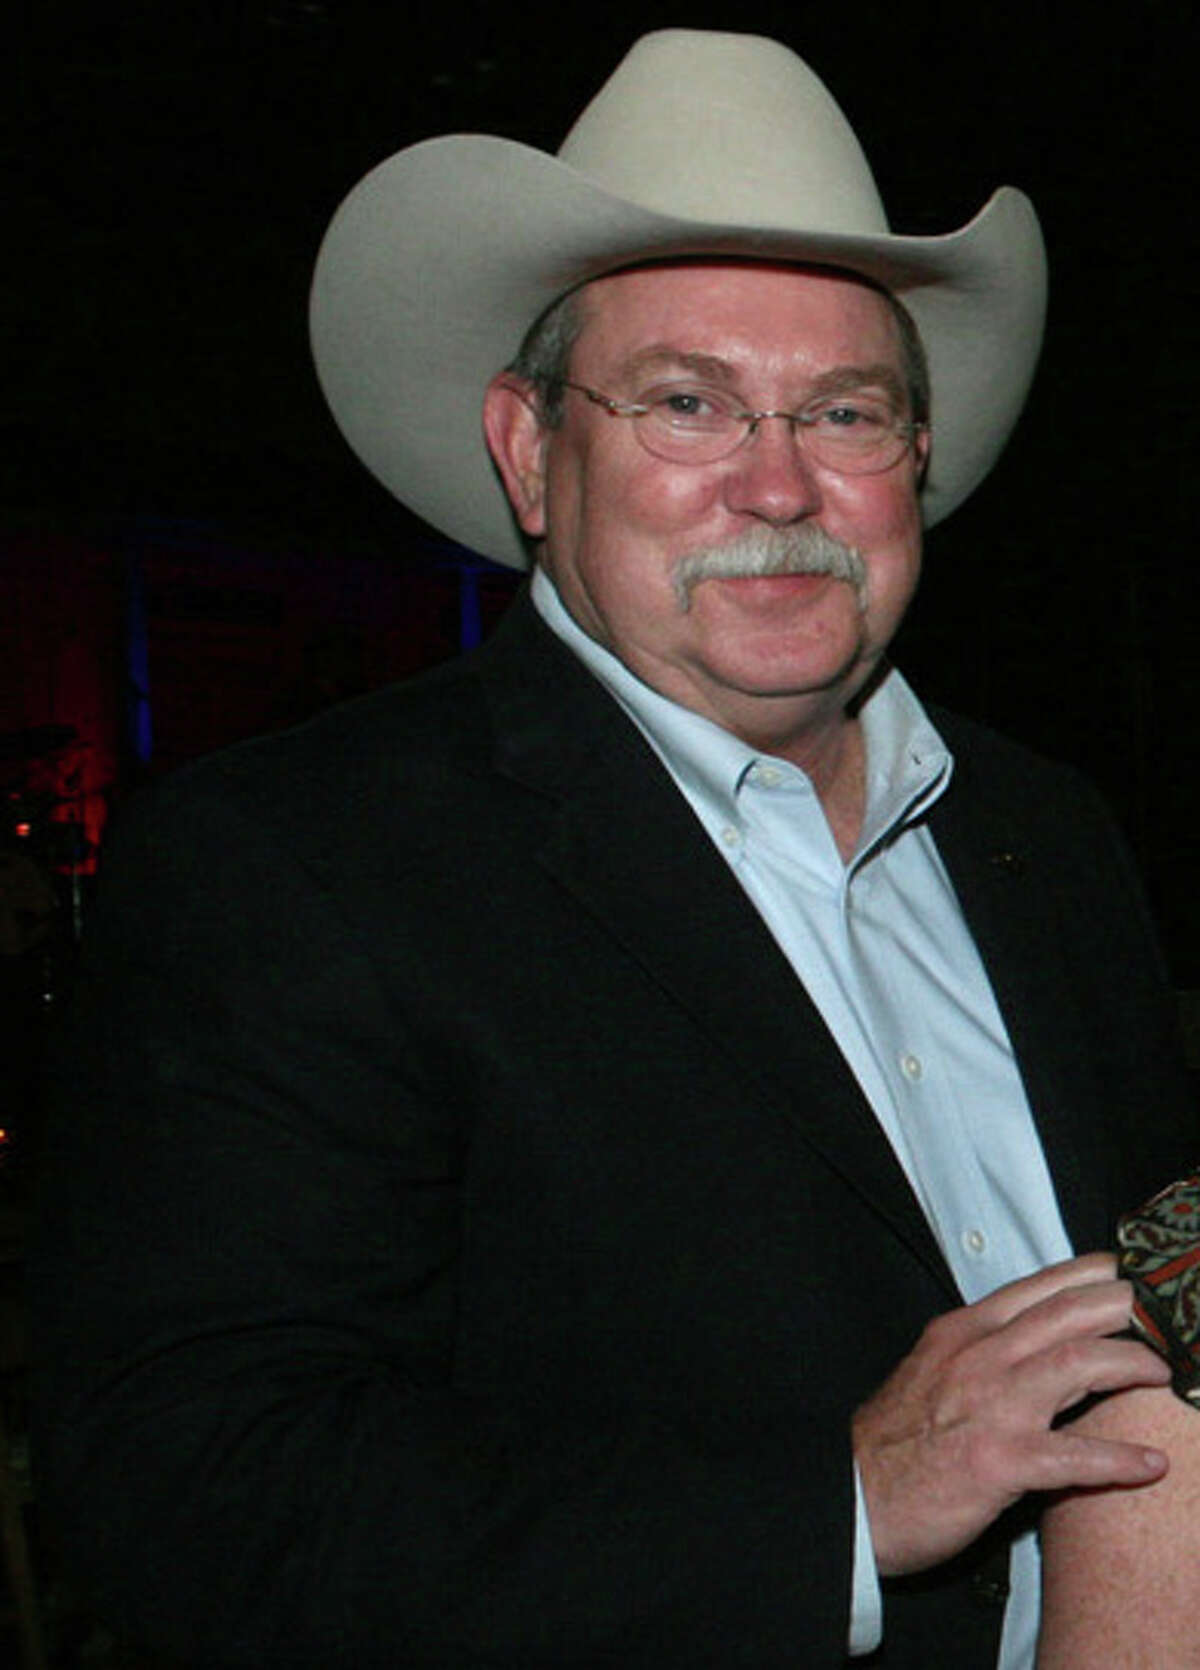 Steve Bridges, the chairman for S.A.’s rodeo, accepted the award.